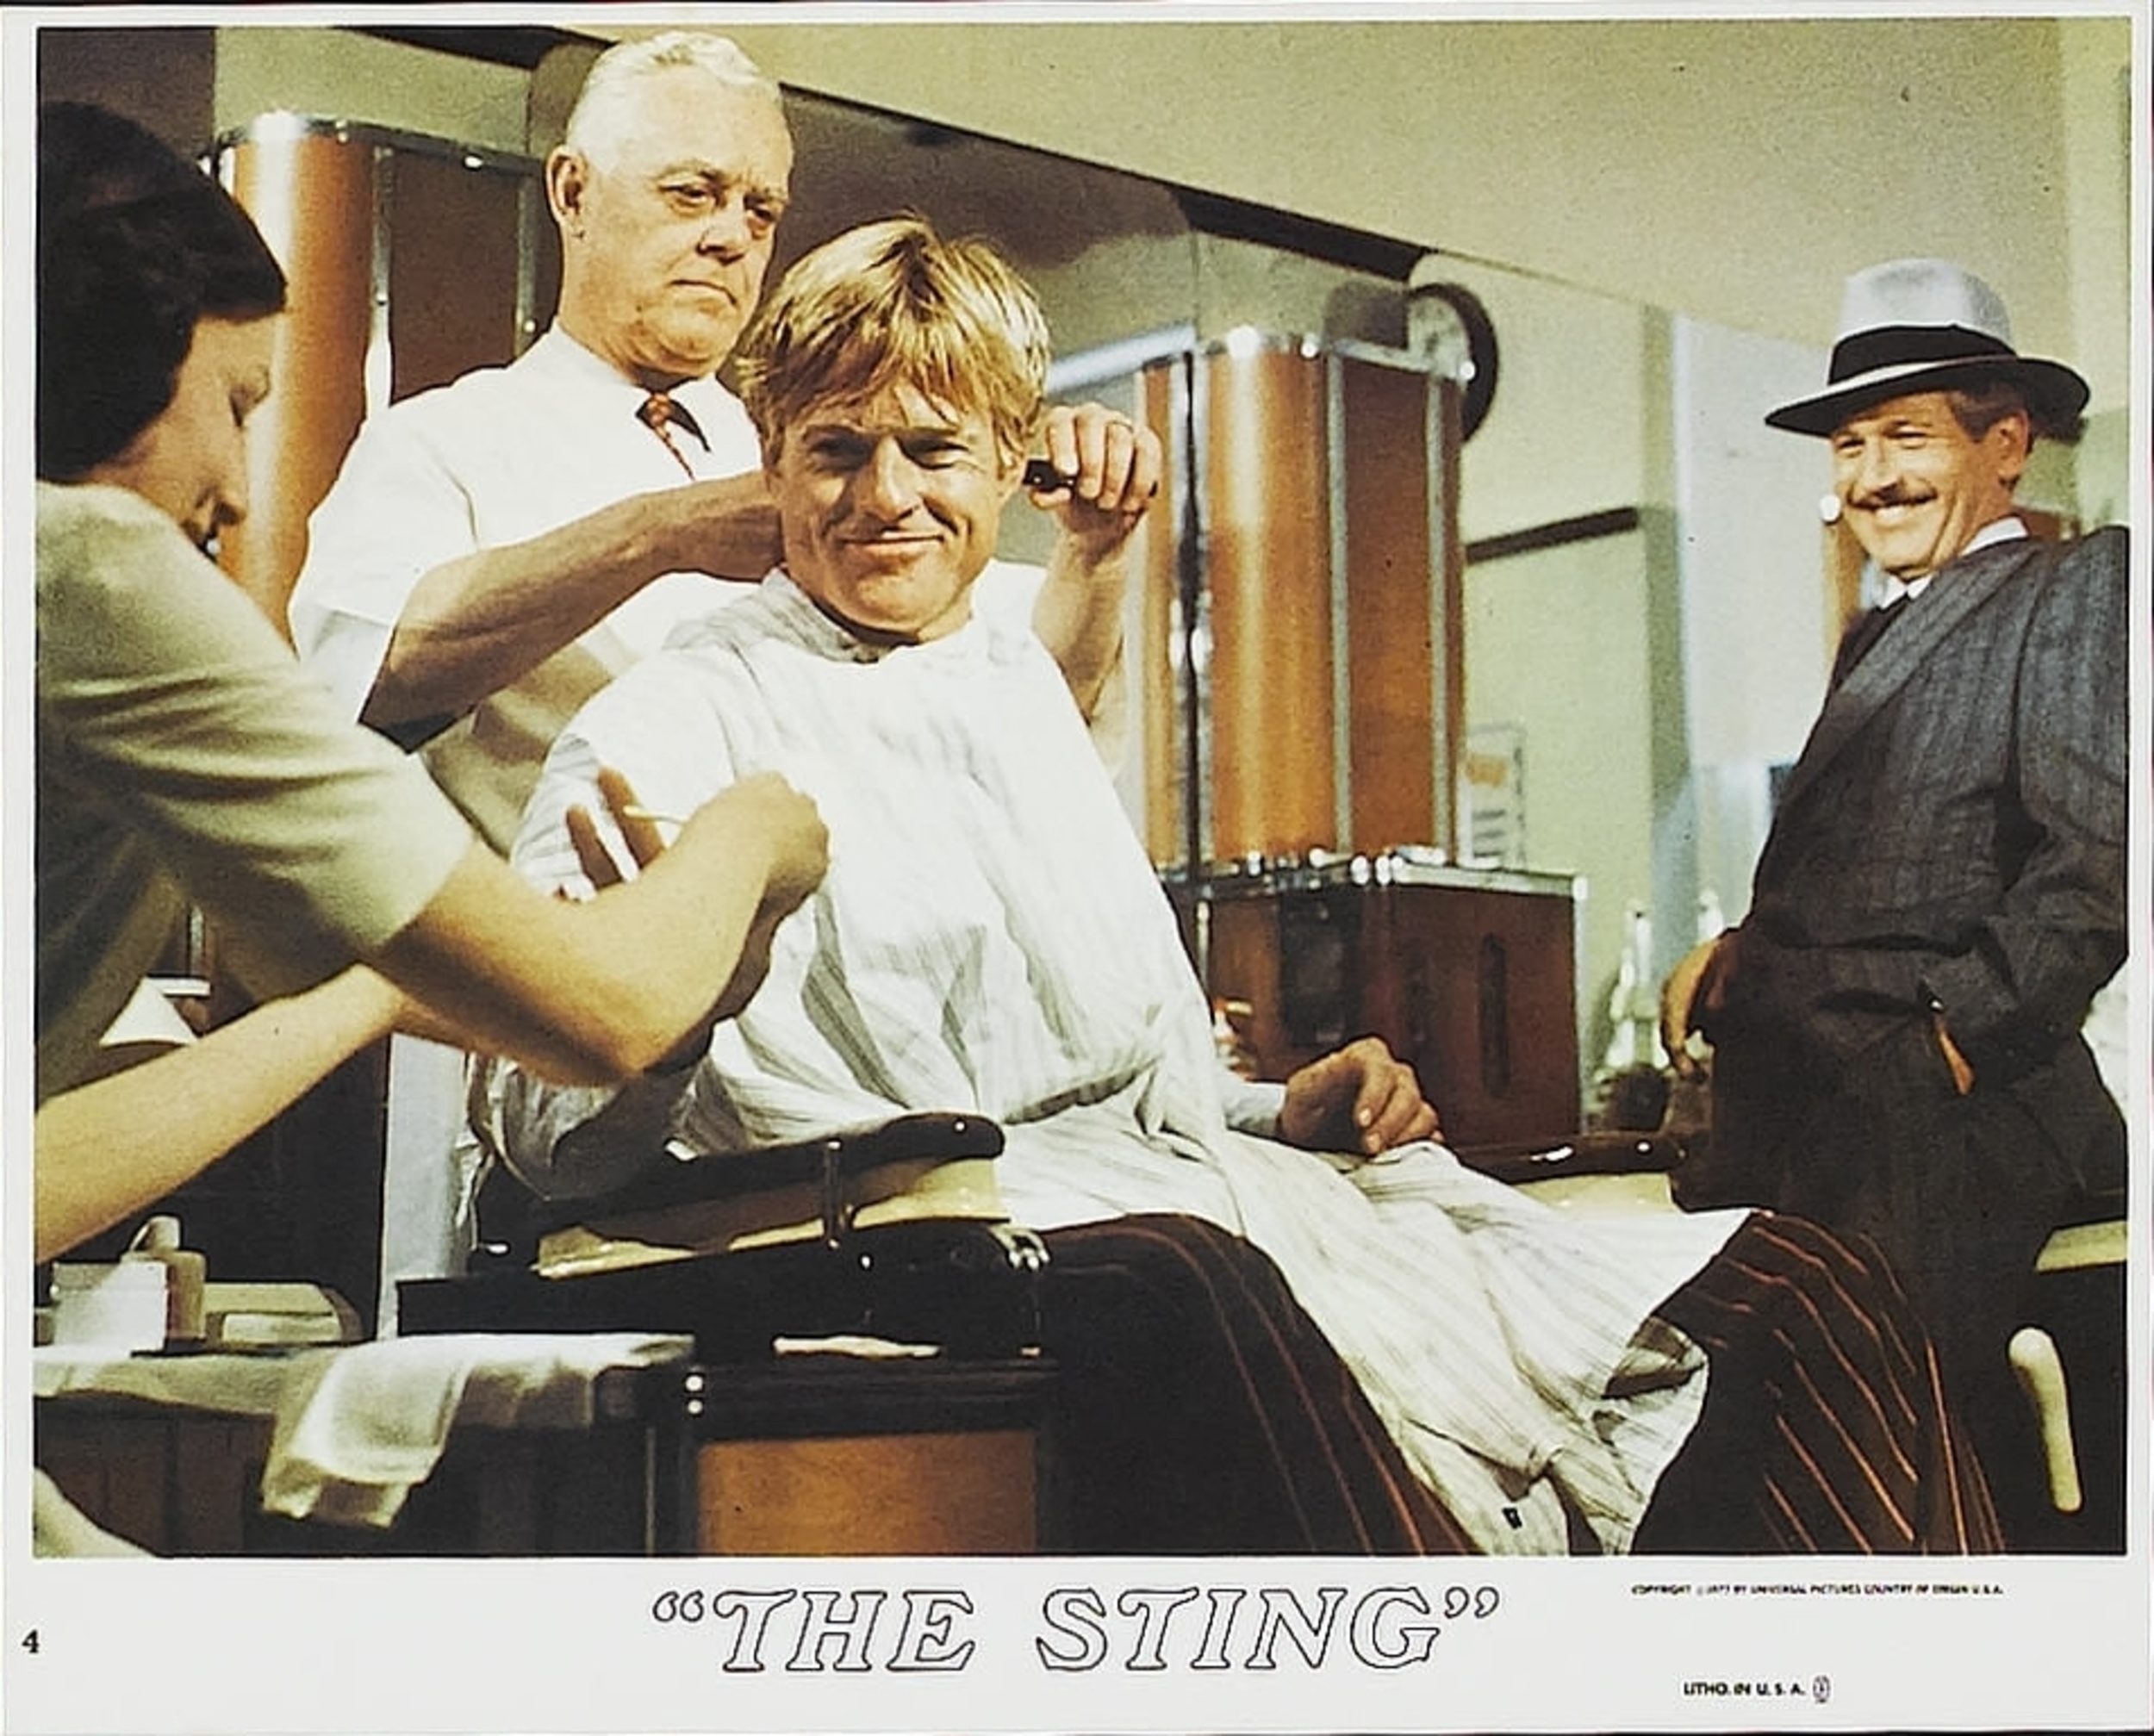 <p>“The Sting” is widely remembered for its ragtime soundtrack. This included a bunch of Scott Joplin songs that were reimagined by Marvin Hamlisch, who also contributed some original compositions. These days, you might think, “Of course, ragtime was surely popular in the ‘30s.” In reality, though, ragtime’s peak had already come and gone, and Joplin was not popular in the ‘30s. The reason they used the music was that Joplin songs were used in the 1931 crime movie “The Public Enemy.” It was another attempt to feel like a ‘30s crime film.</p><p>You may also like: <a href='https://www.yardbarker.com/entertainment/articles/20th_century_sitcoms_that_are_still_in_our_regular_rotation_021124/s1__39345263'>20th-century sitcoms that are still in our regular rotation</a></p>